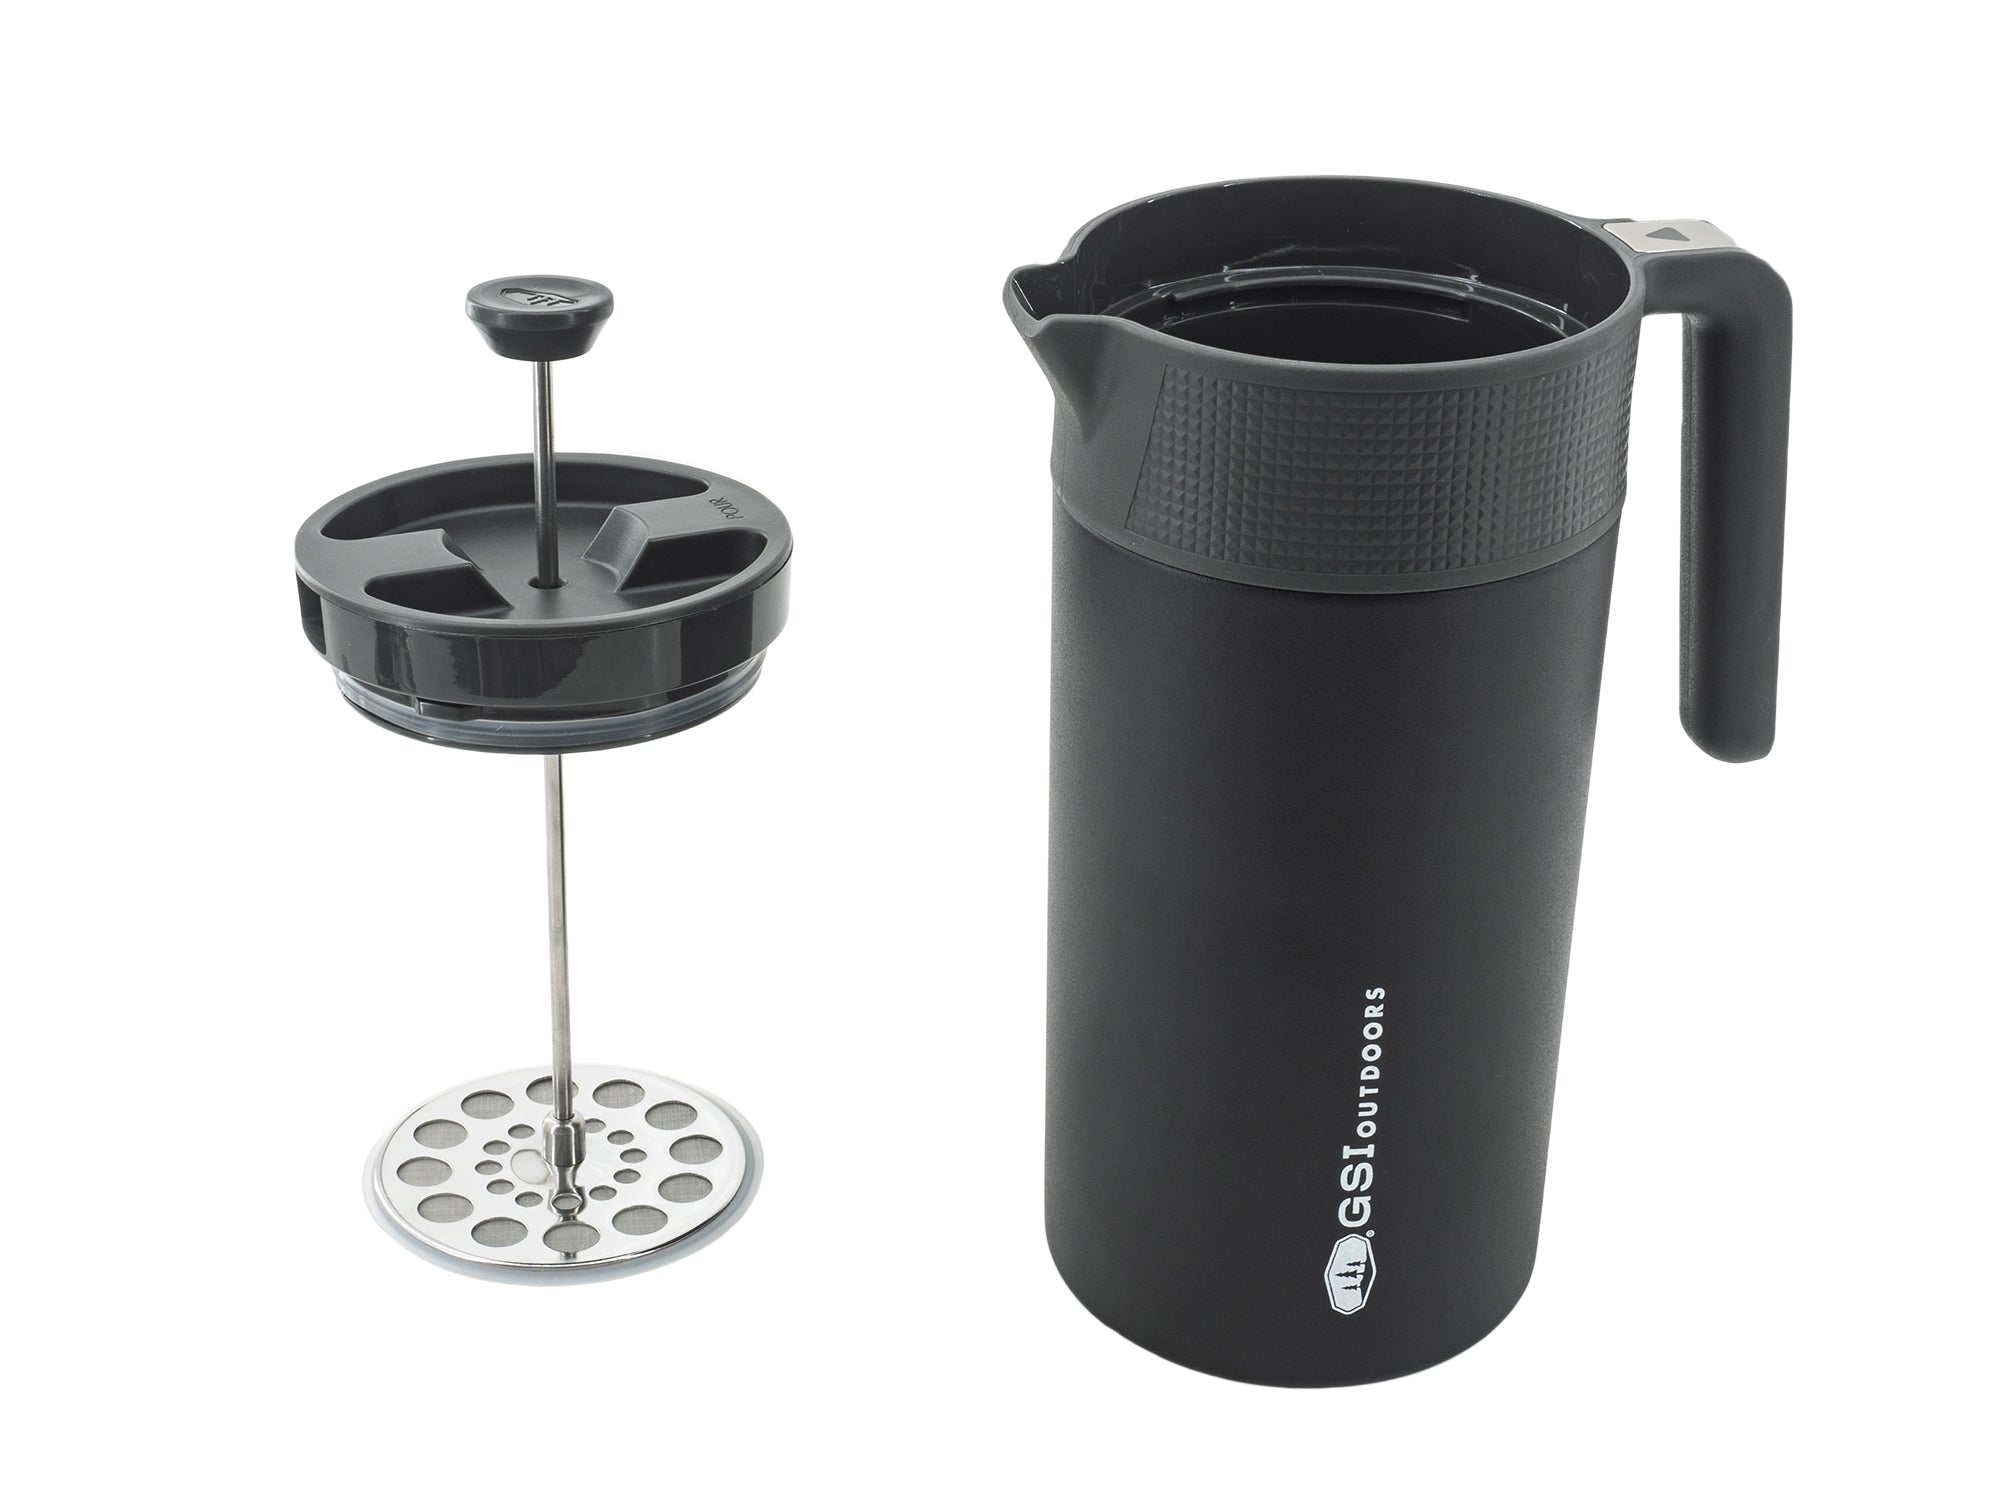 Coffee Grinders For French Press - JavaPresse Coffee Company